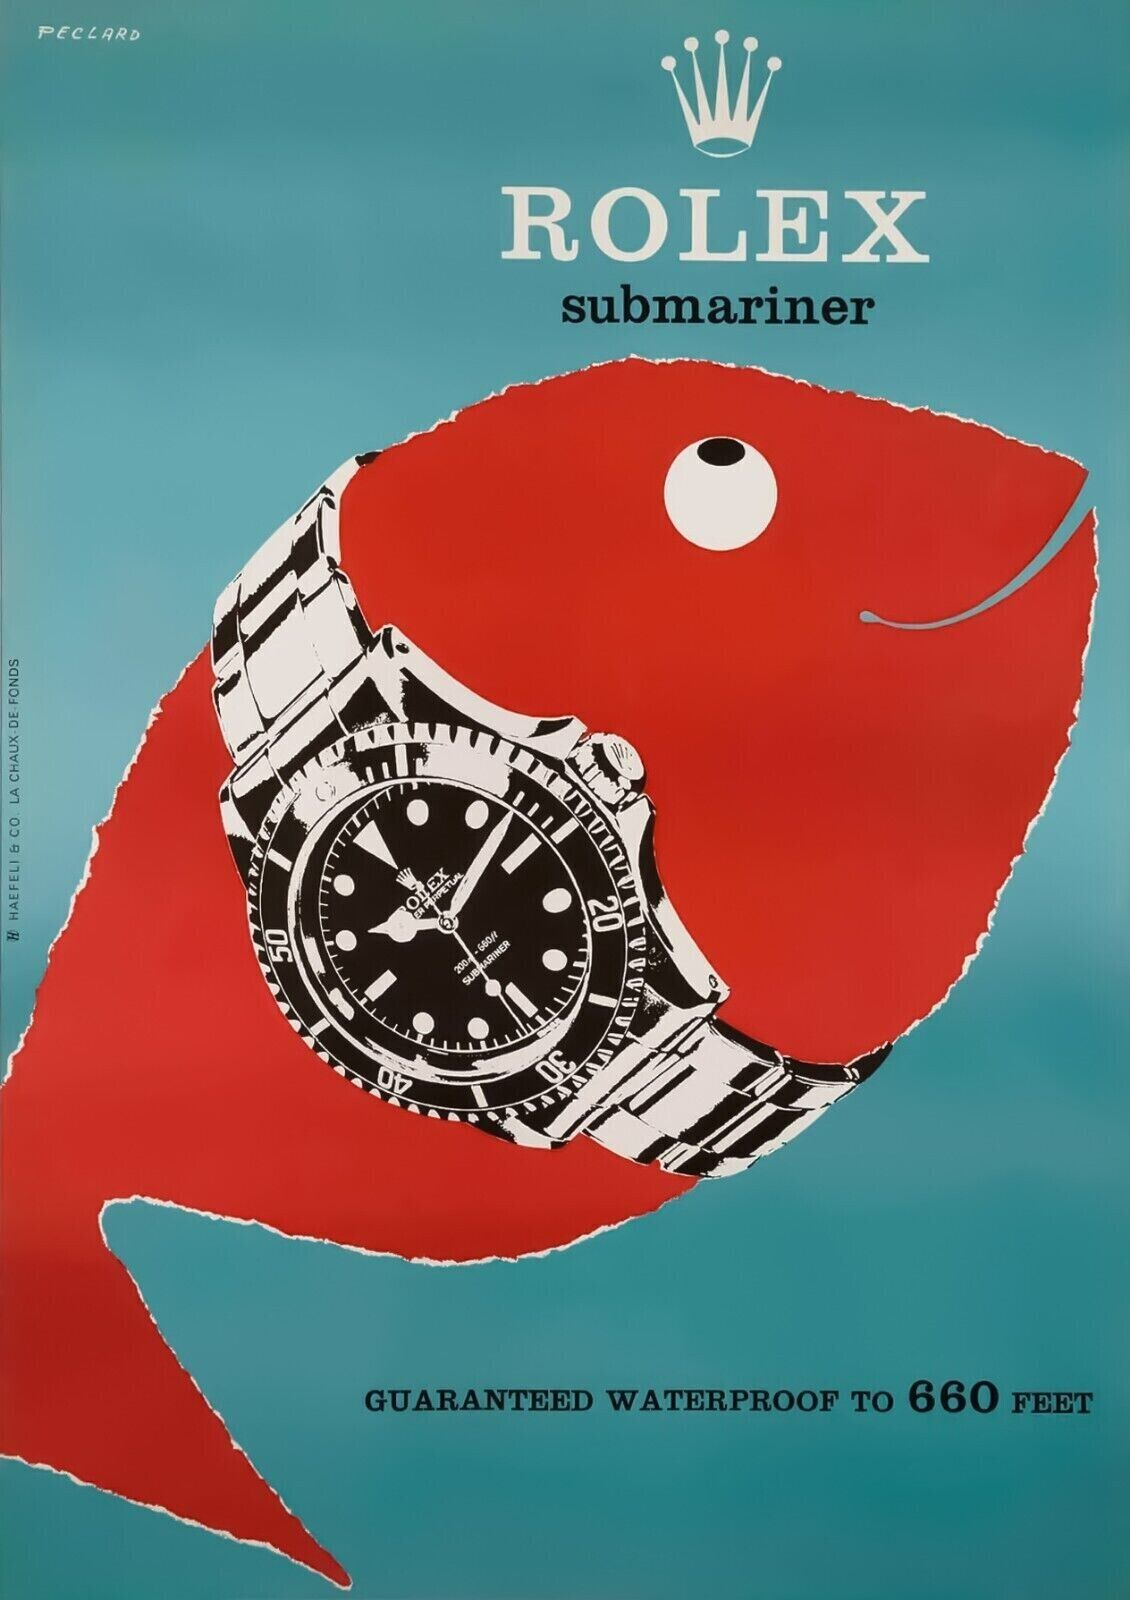 Rolex Submariner Watch REPRINT vintage classic ad 11x15 Poster Luxury wall art